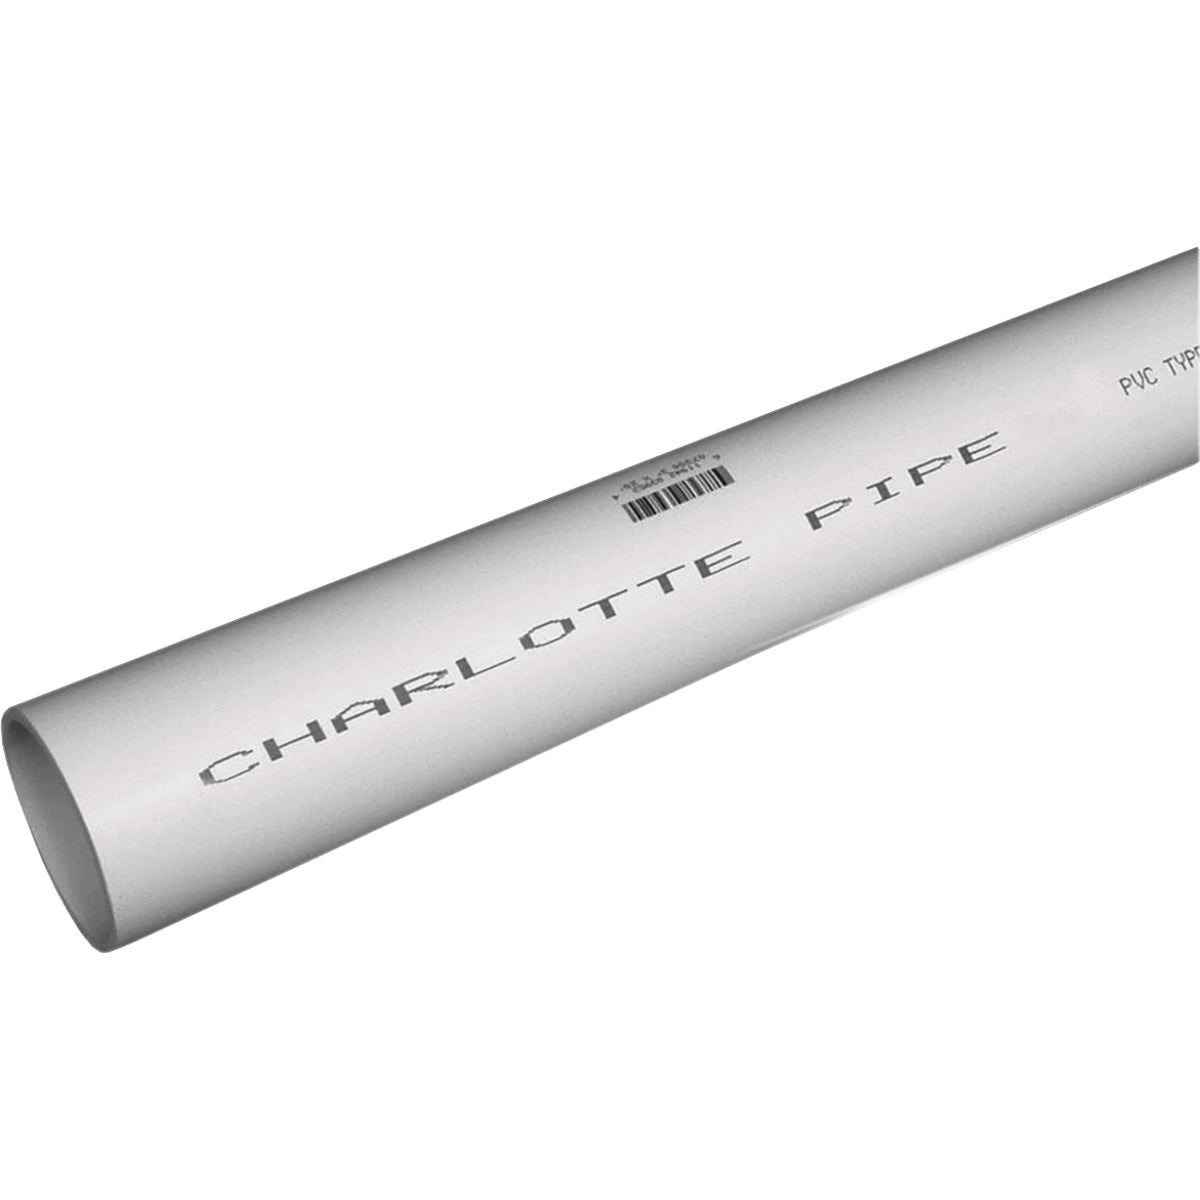 Charlotte Pipe 1 In. x 2 Ft. Schedule 40 PVC Pressure Pipe, Plain End